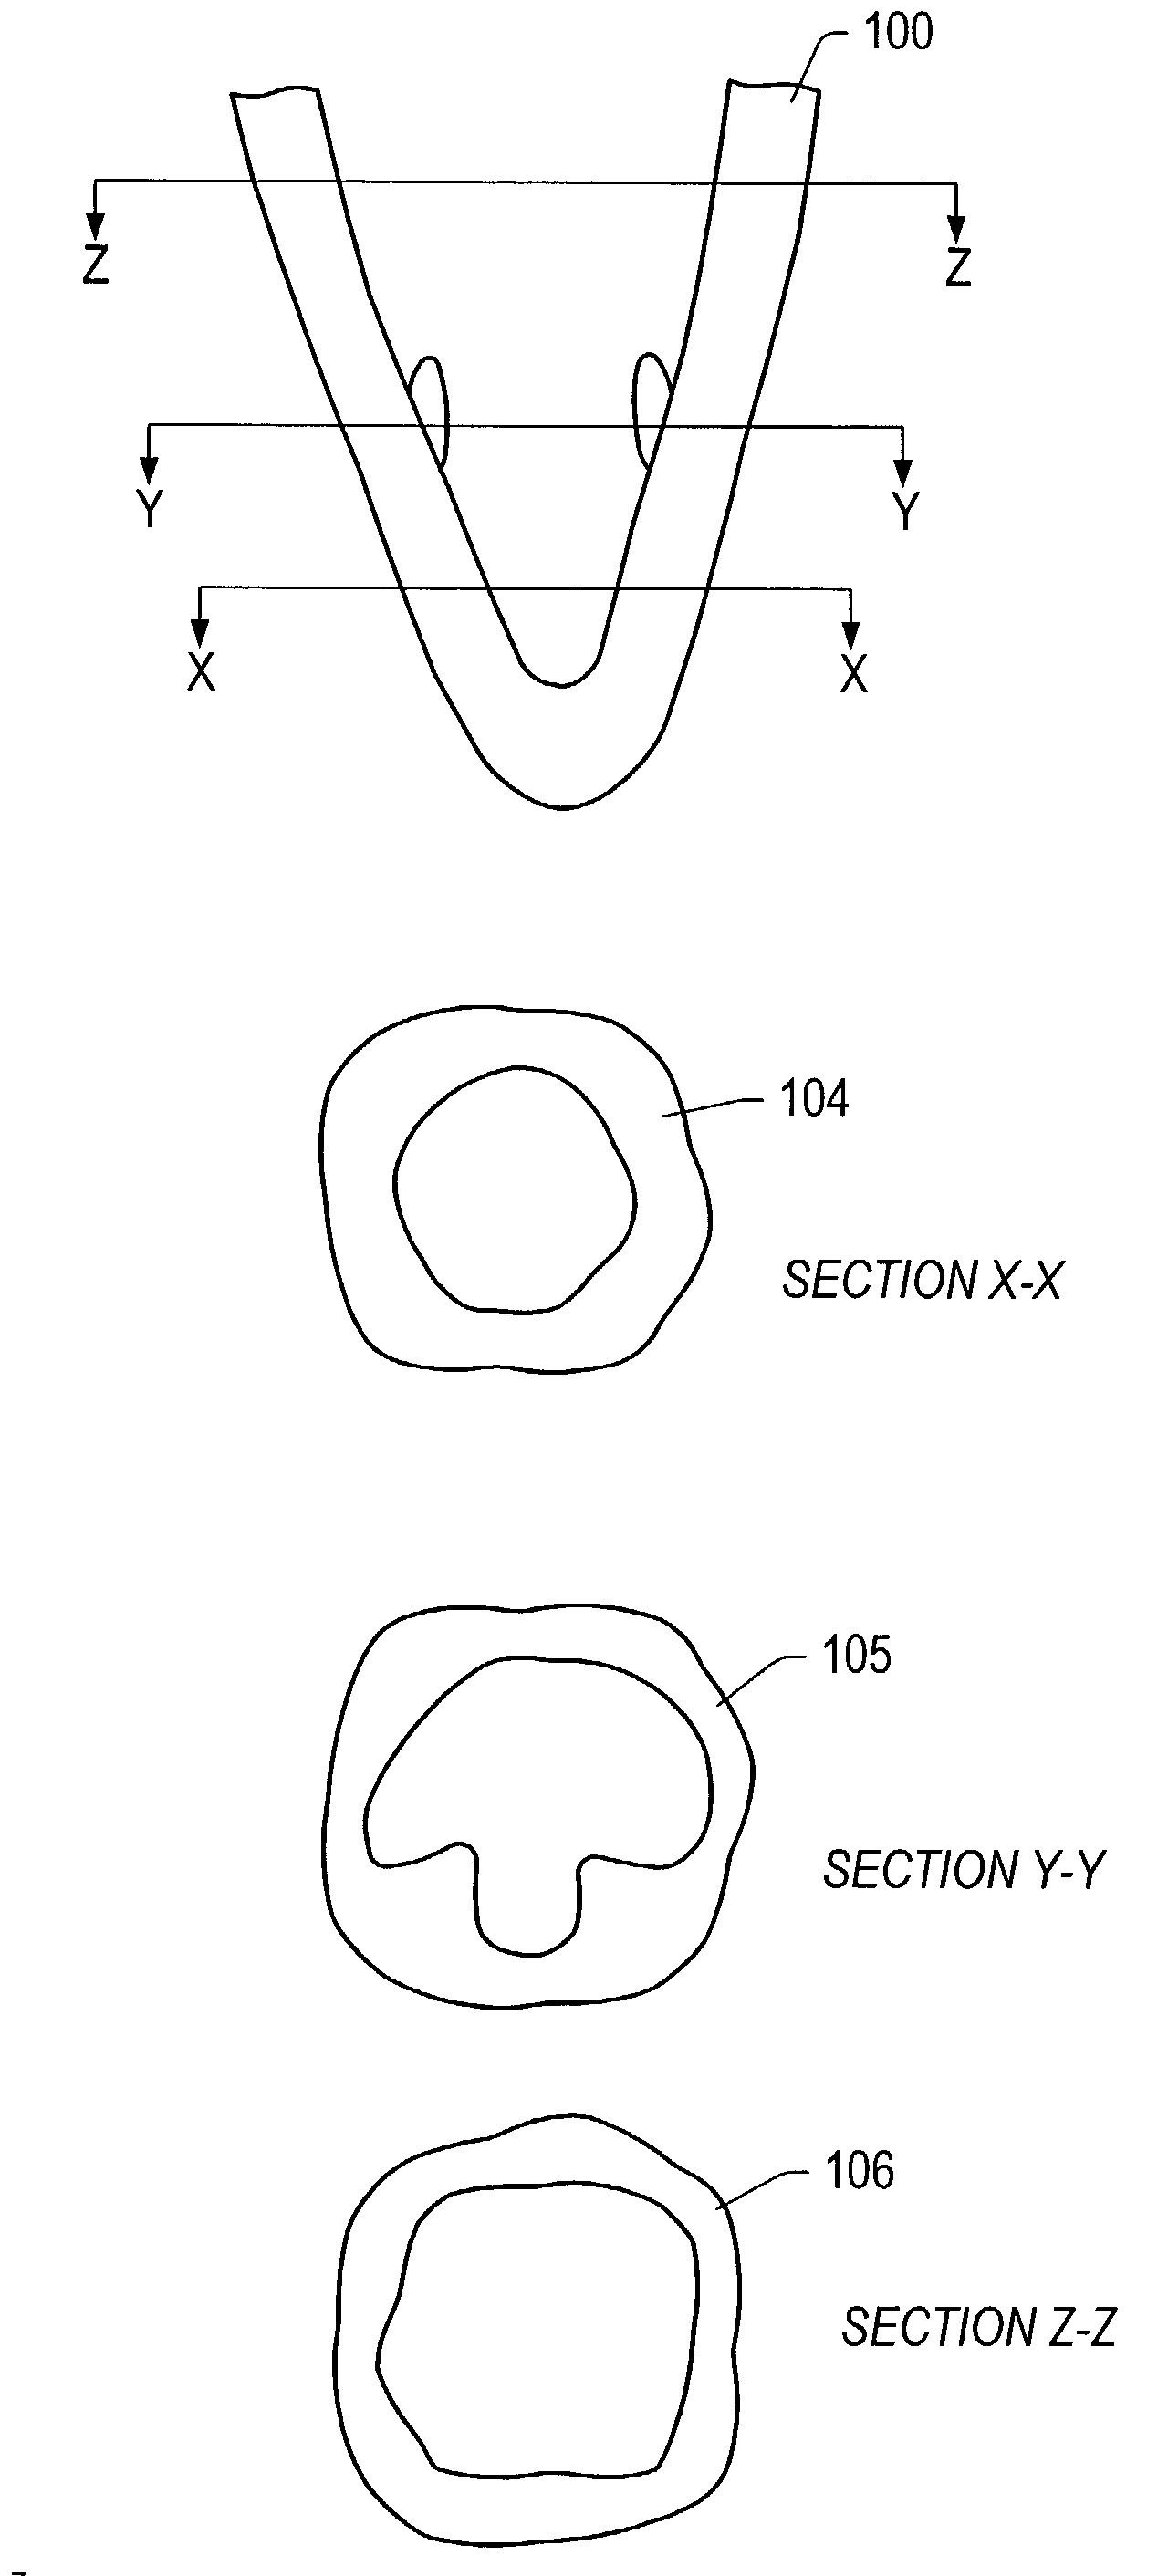 System and method for facilitating cardiac intervention